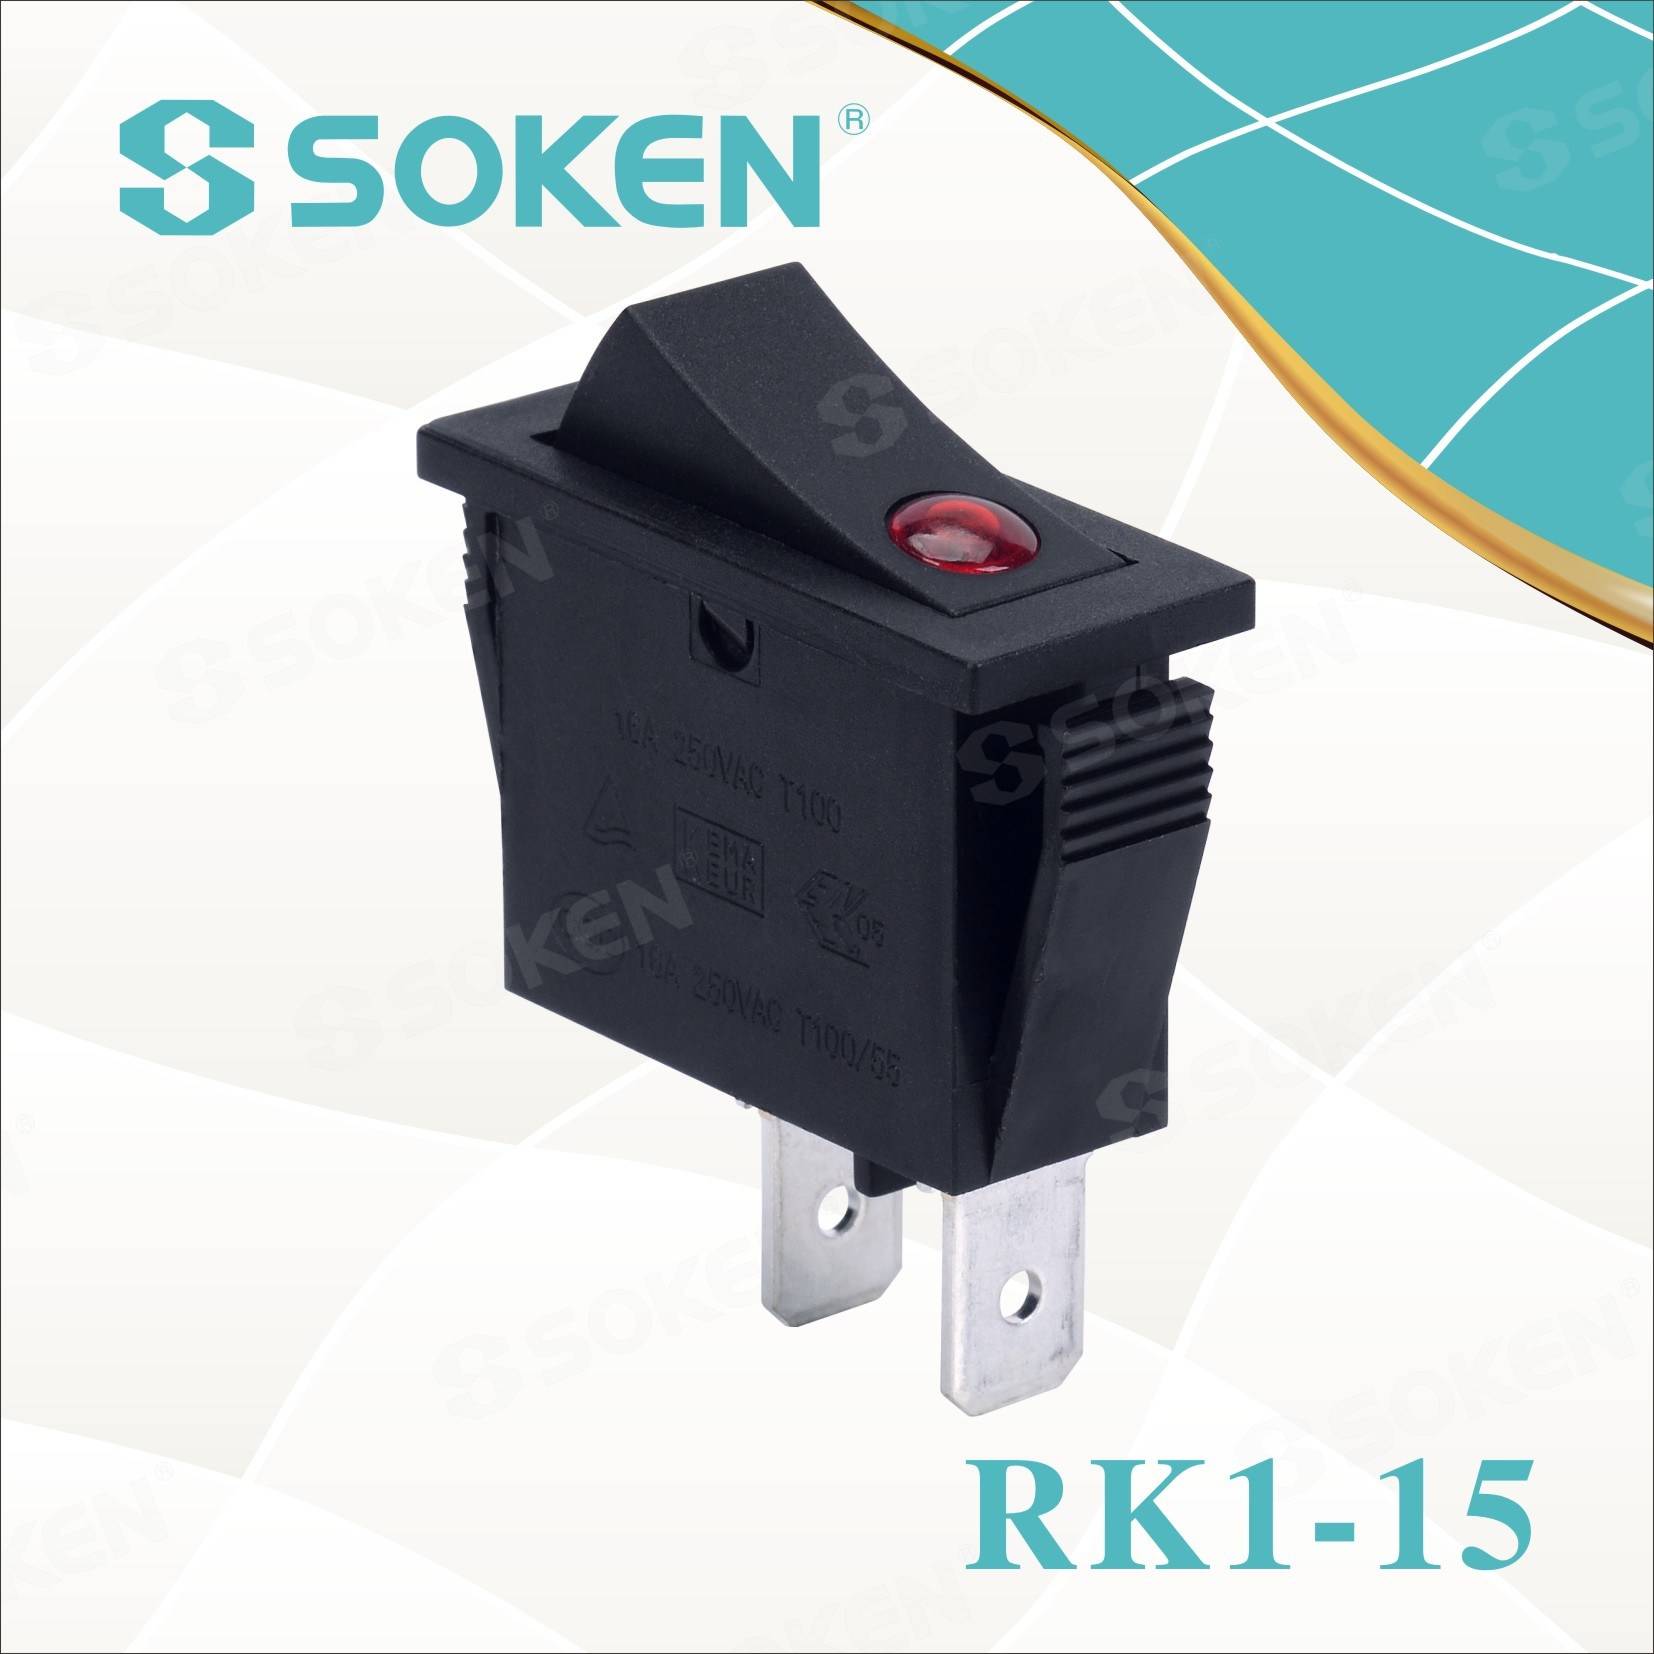 Fixed Competitive Price Plastic Switches Cover -
 Soken Rk1-15 1X1 B/B on off Rocker Switch – Master Soken Electrical